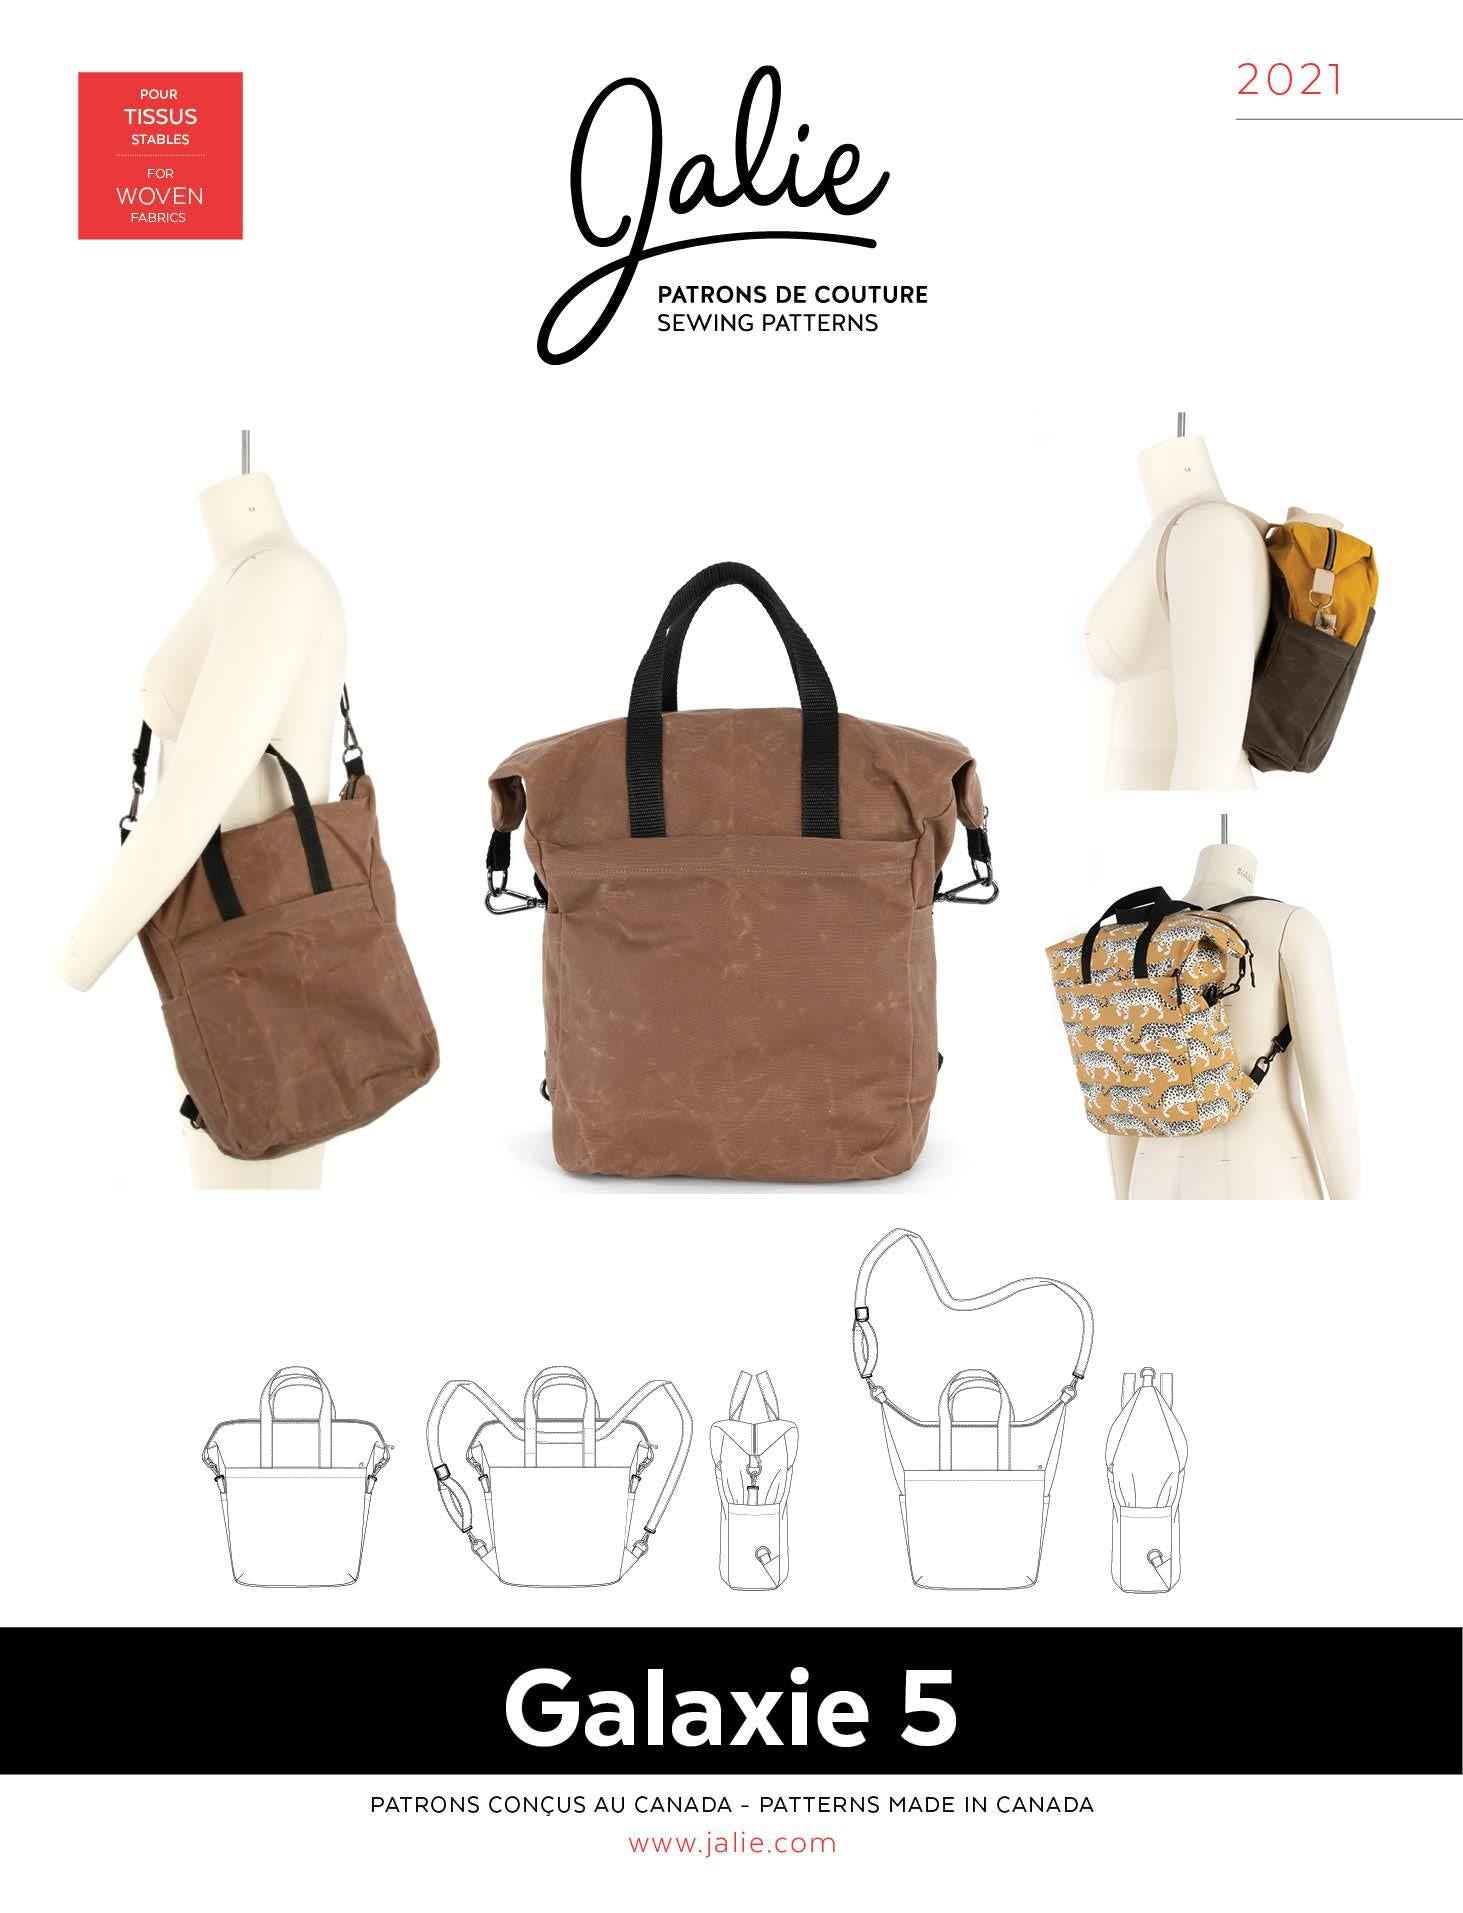 Convertible Backpack Pdf Sewing Pattern 